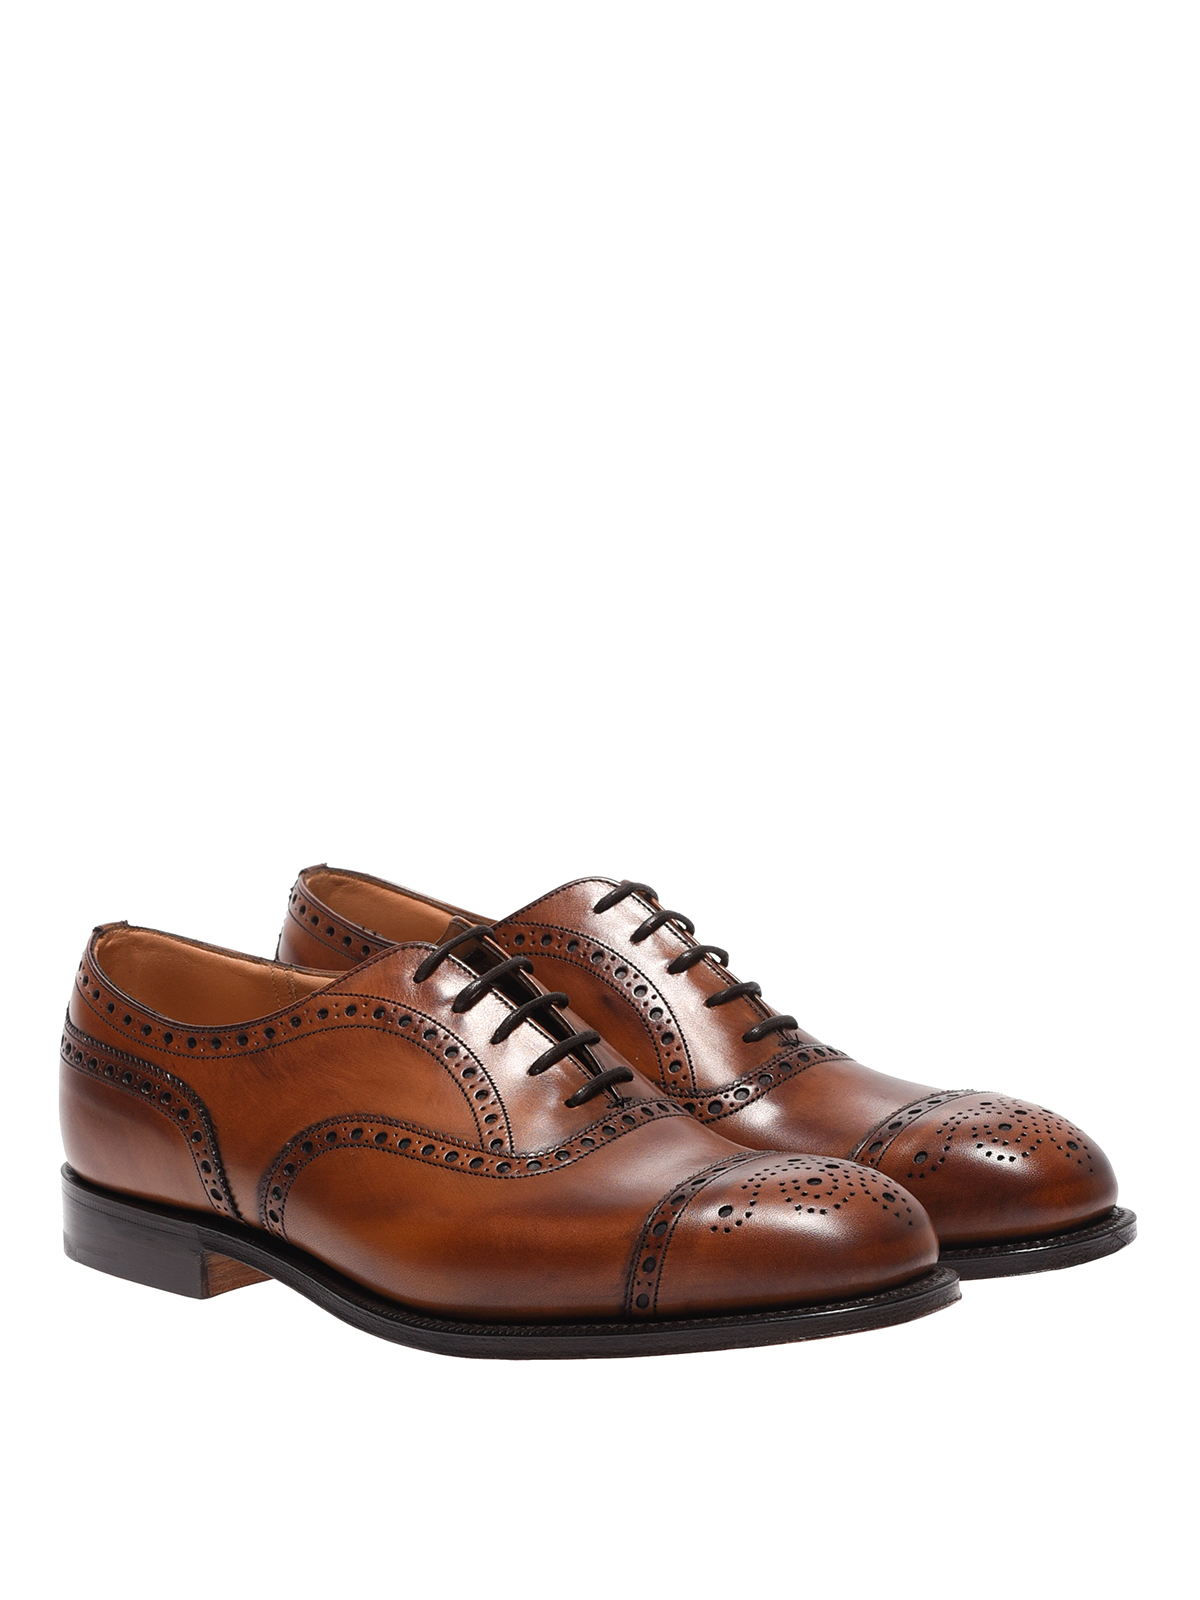 Church s Diplomat 173 Oxford shoes  in Nevada  leather 